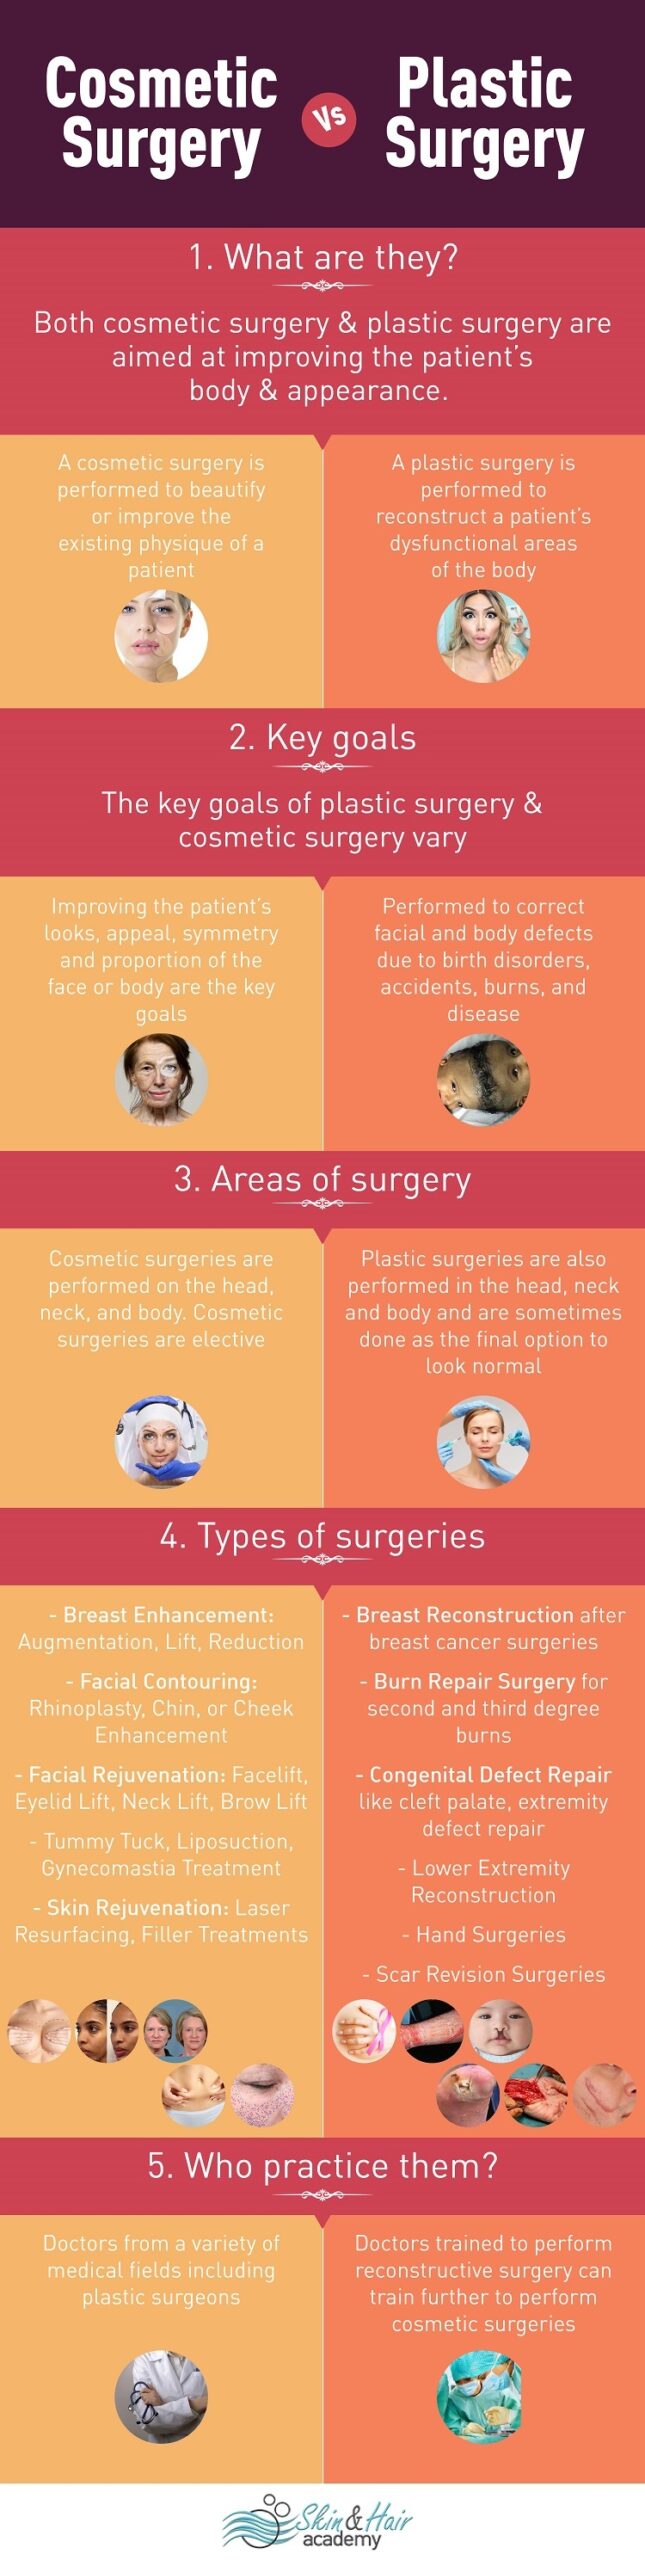 Cosmetic Surgery and Plastic Surgery